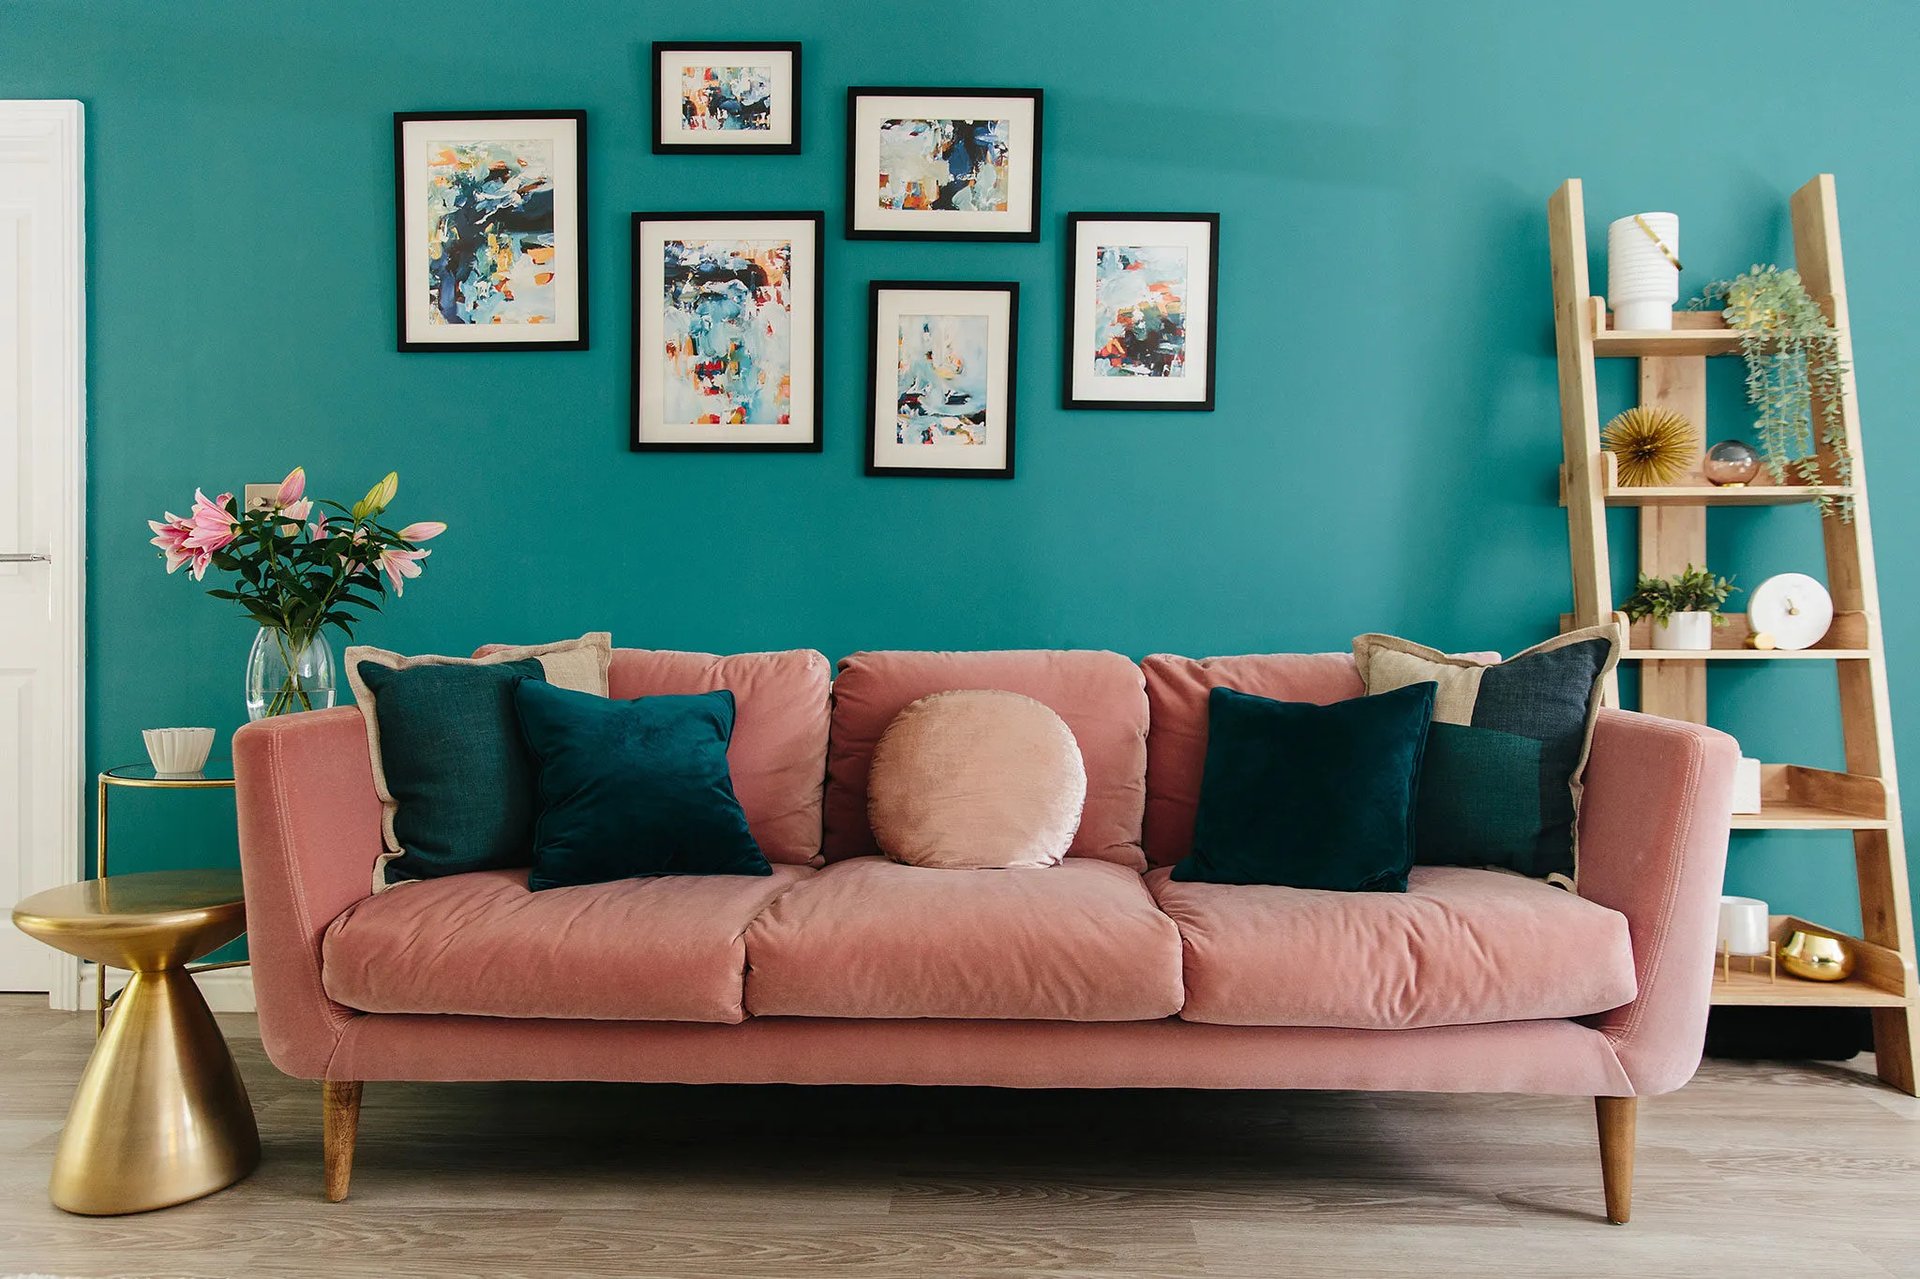 Pink and teal living room